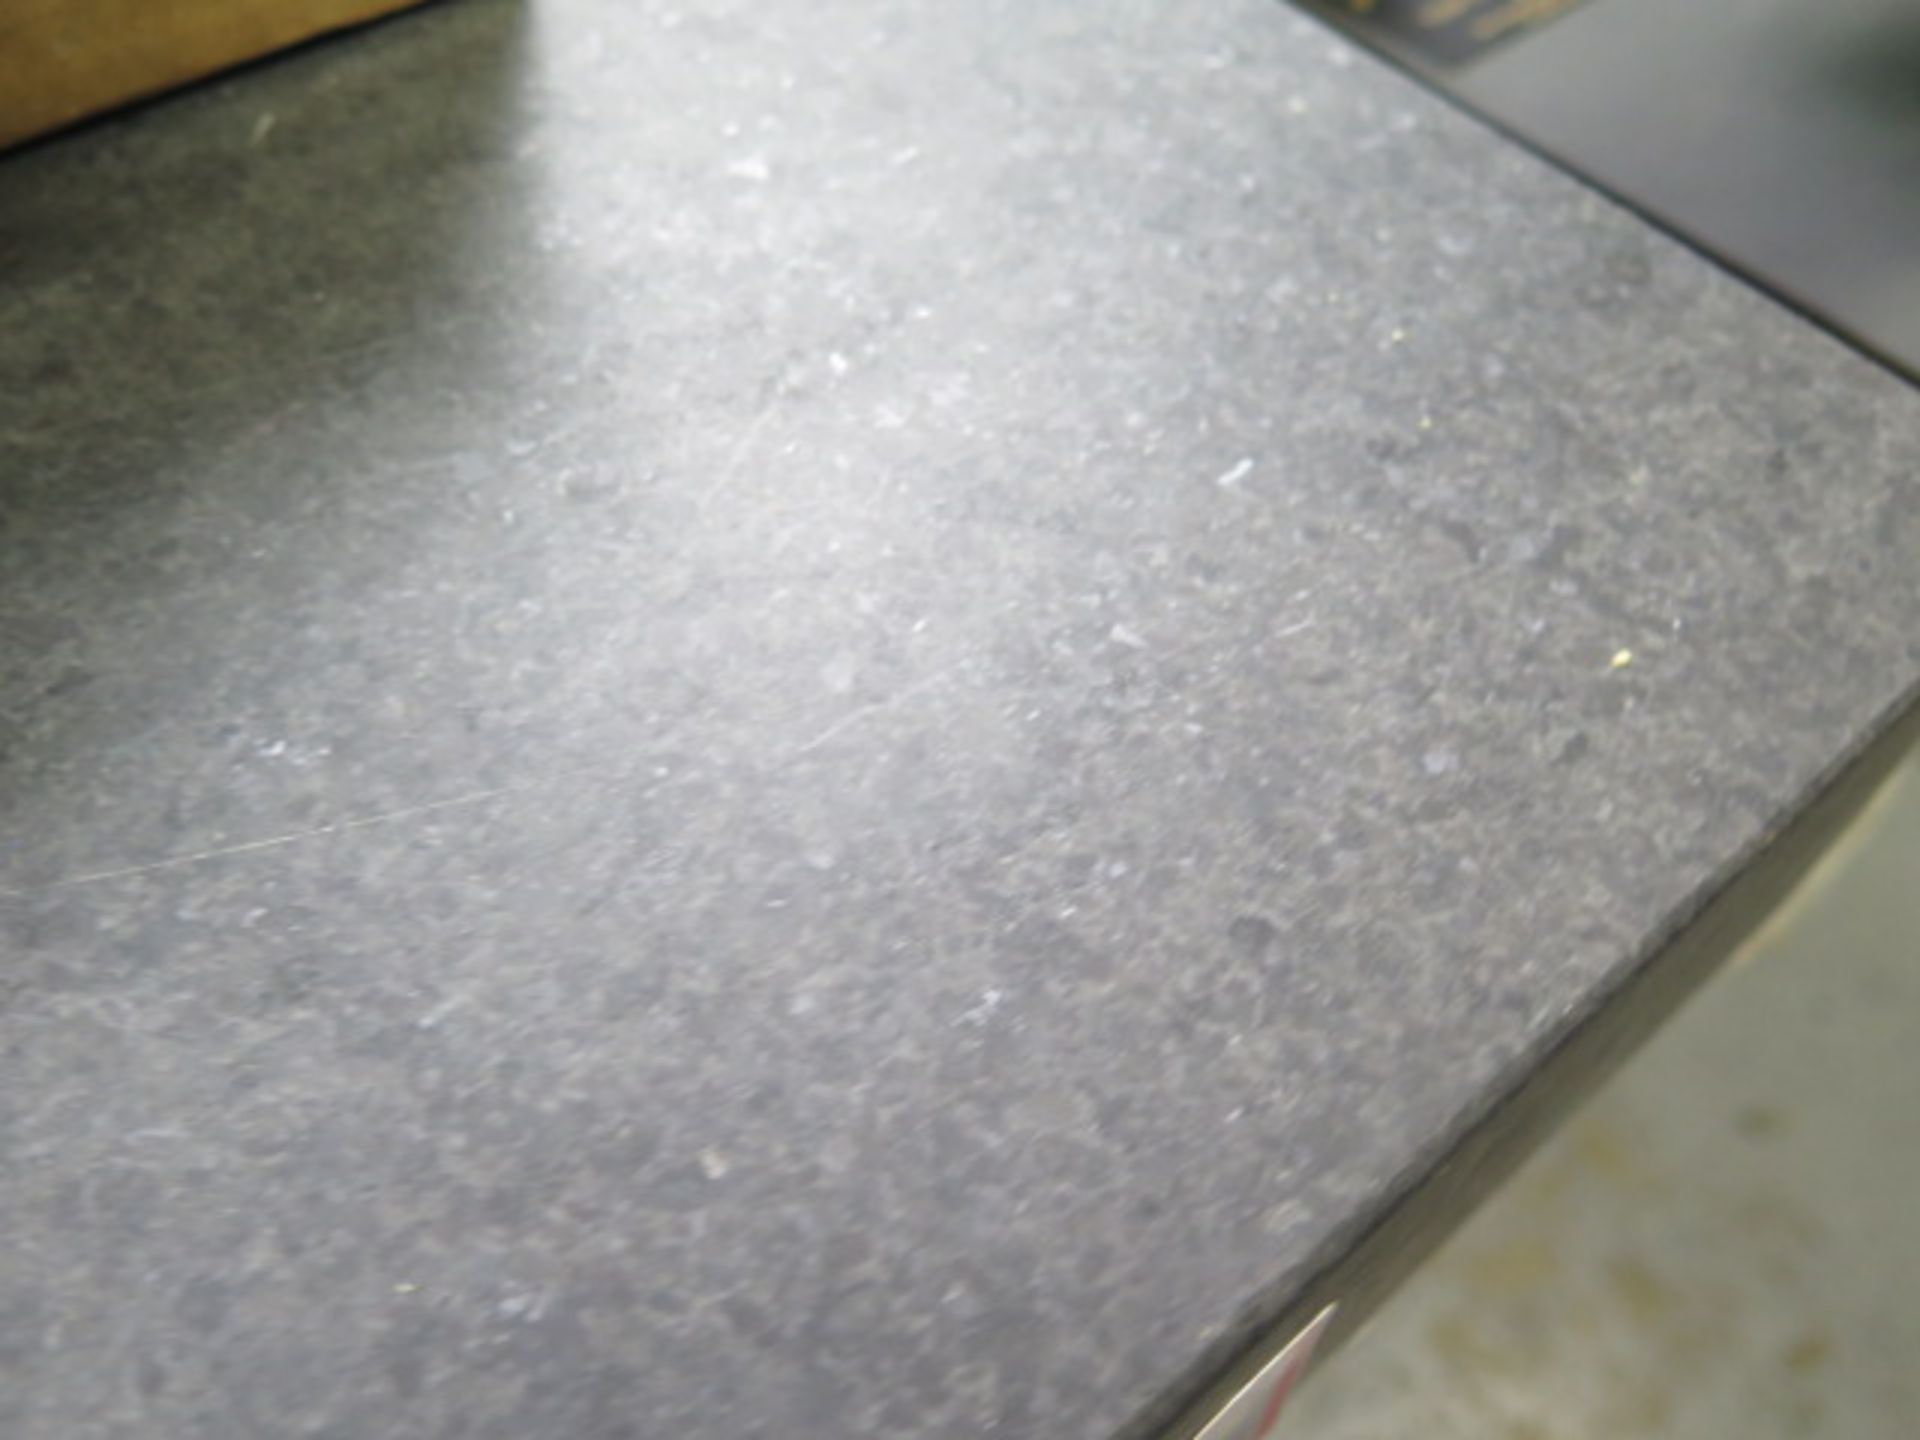 Precision 18" x 24" x 3" Granite Surface Plate (SOLD AS-IS - NO WARRANTY) - Image 4 of 6